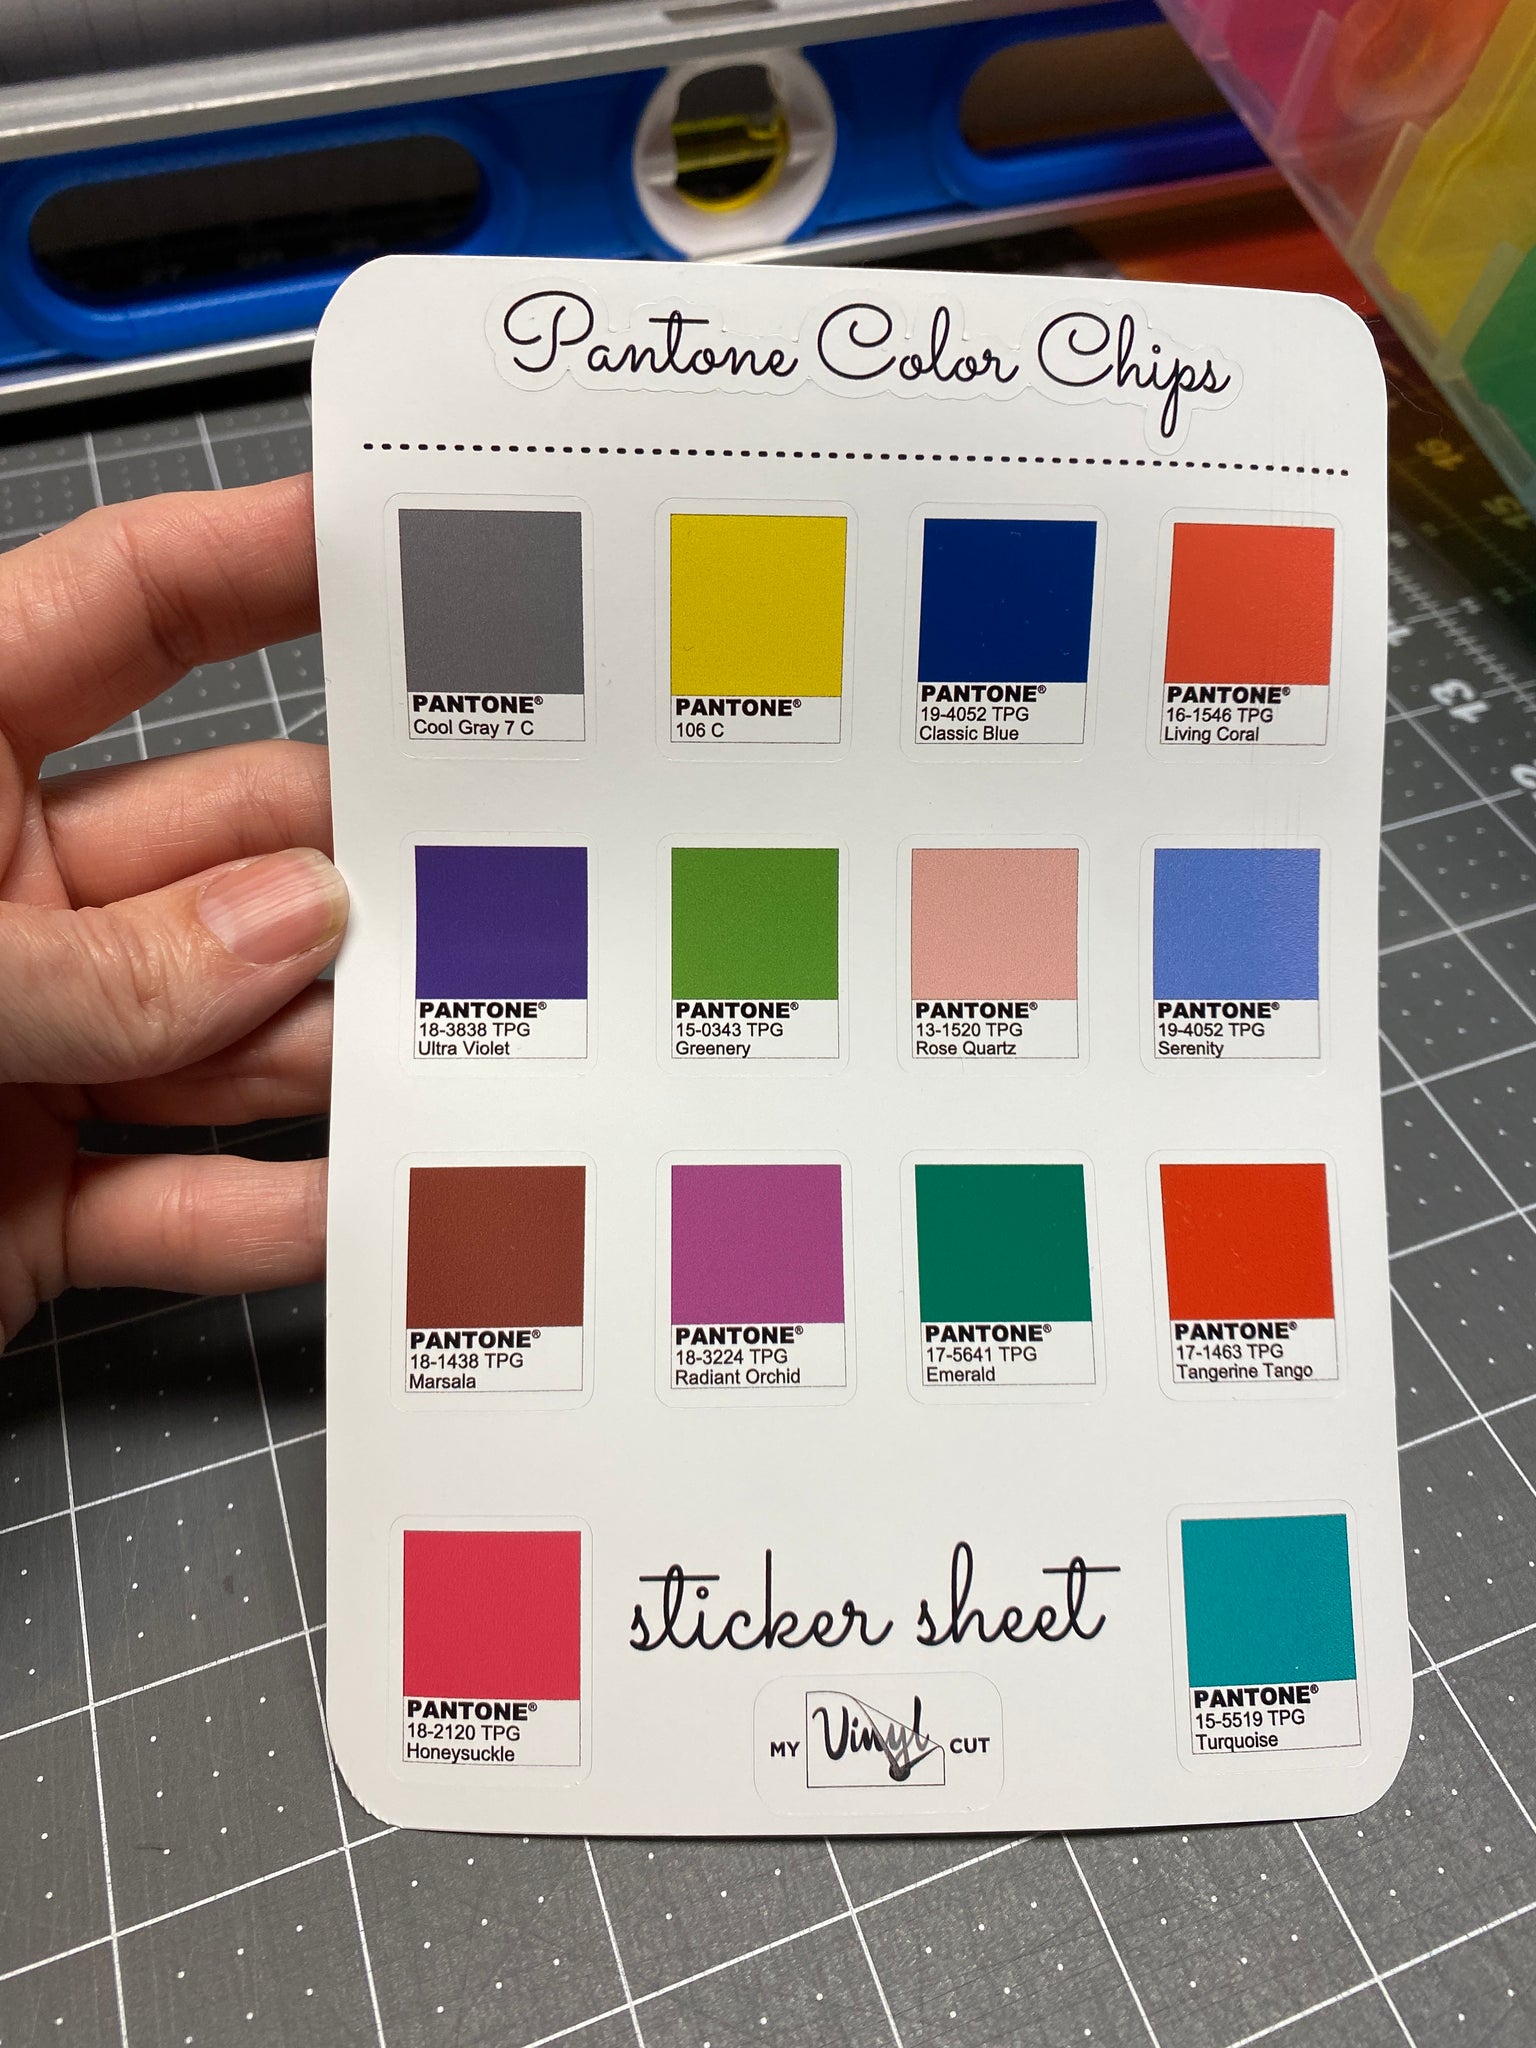 Colorful Paint Swatch Stickers for Planners and Journals